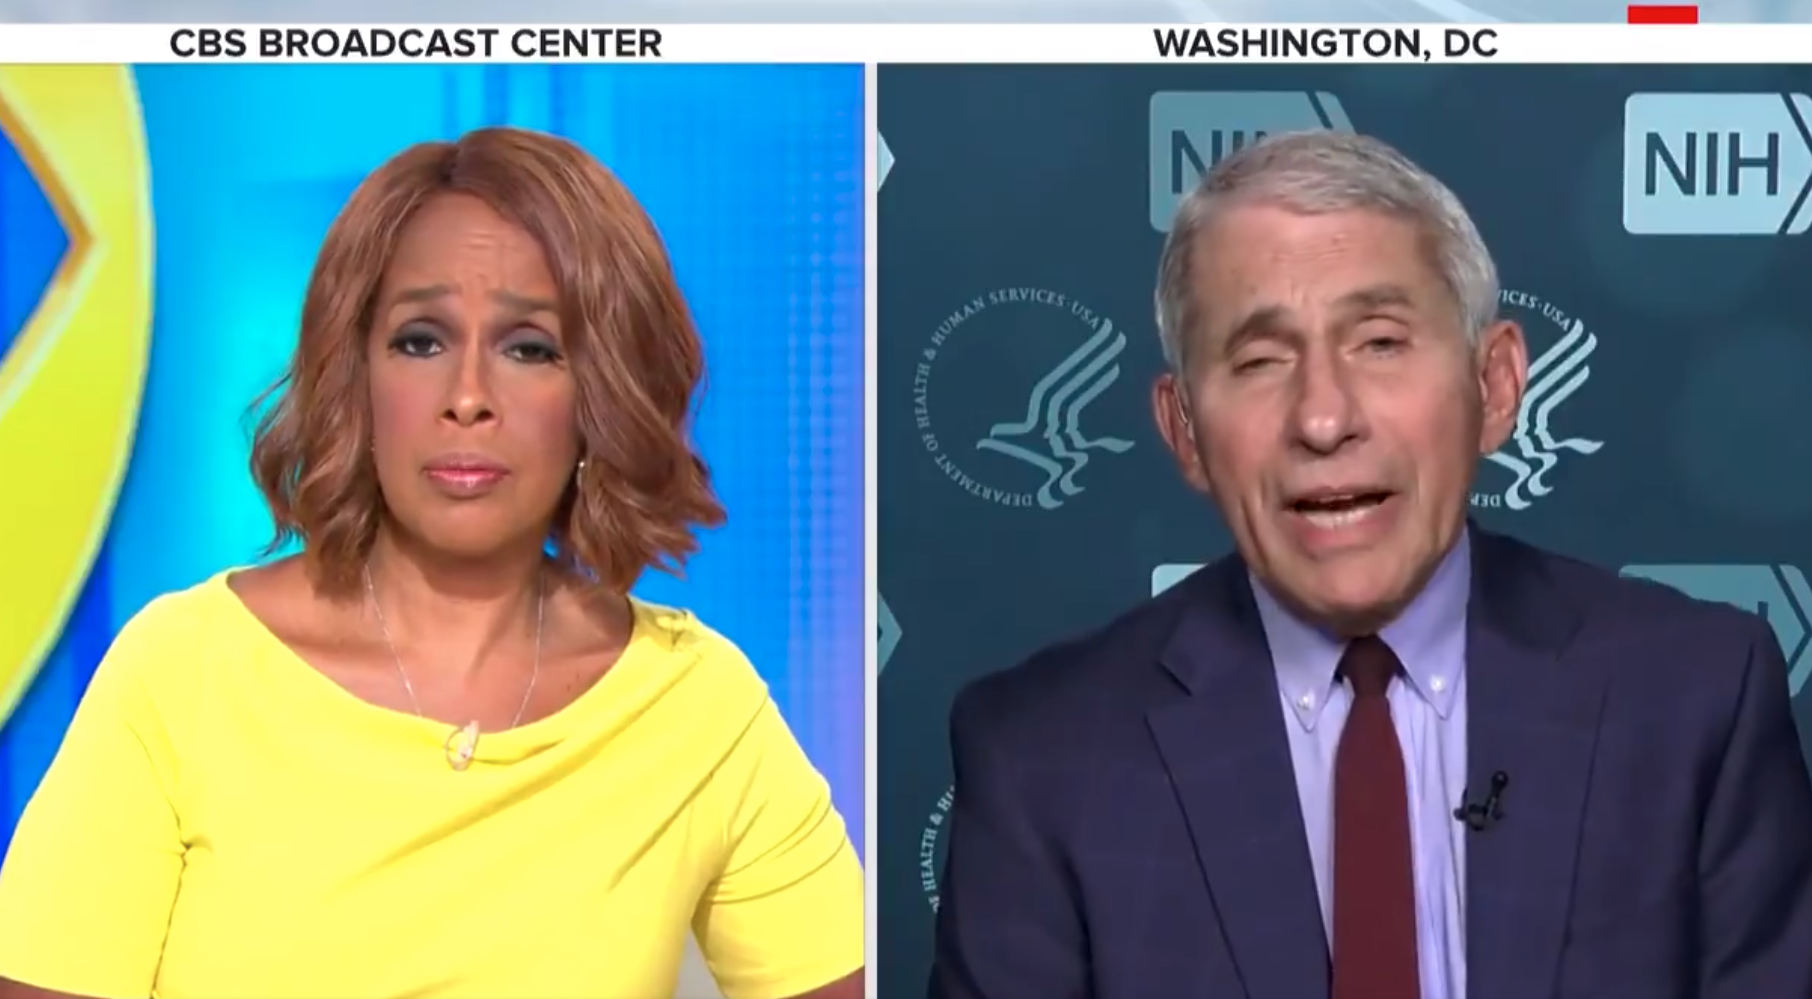 Gayle King and Dr. Anthony Fauci.